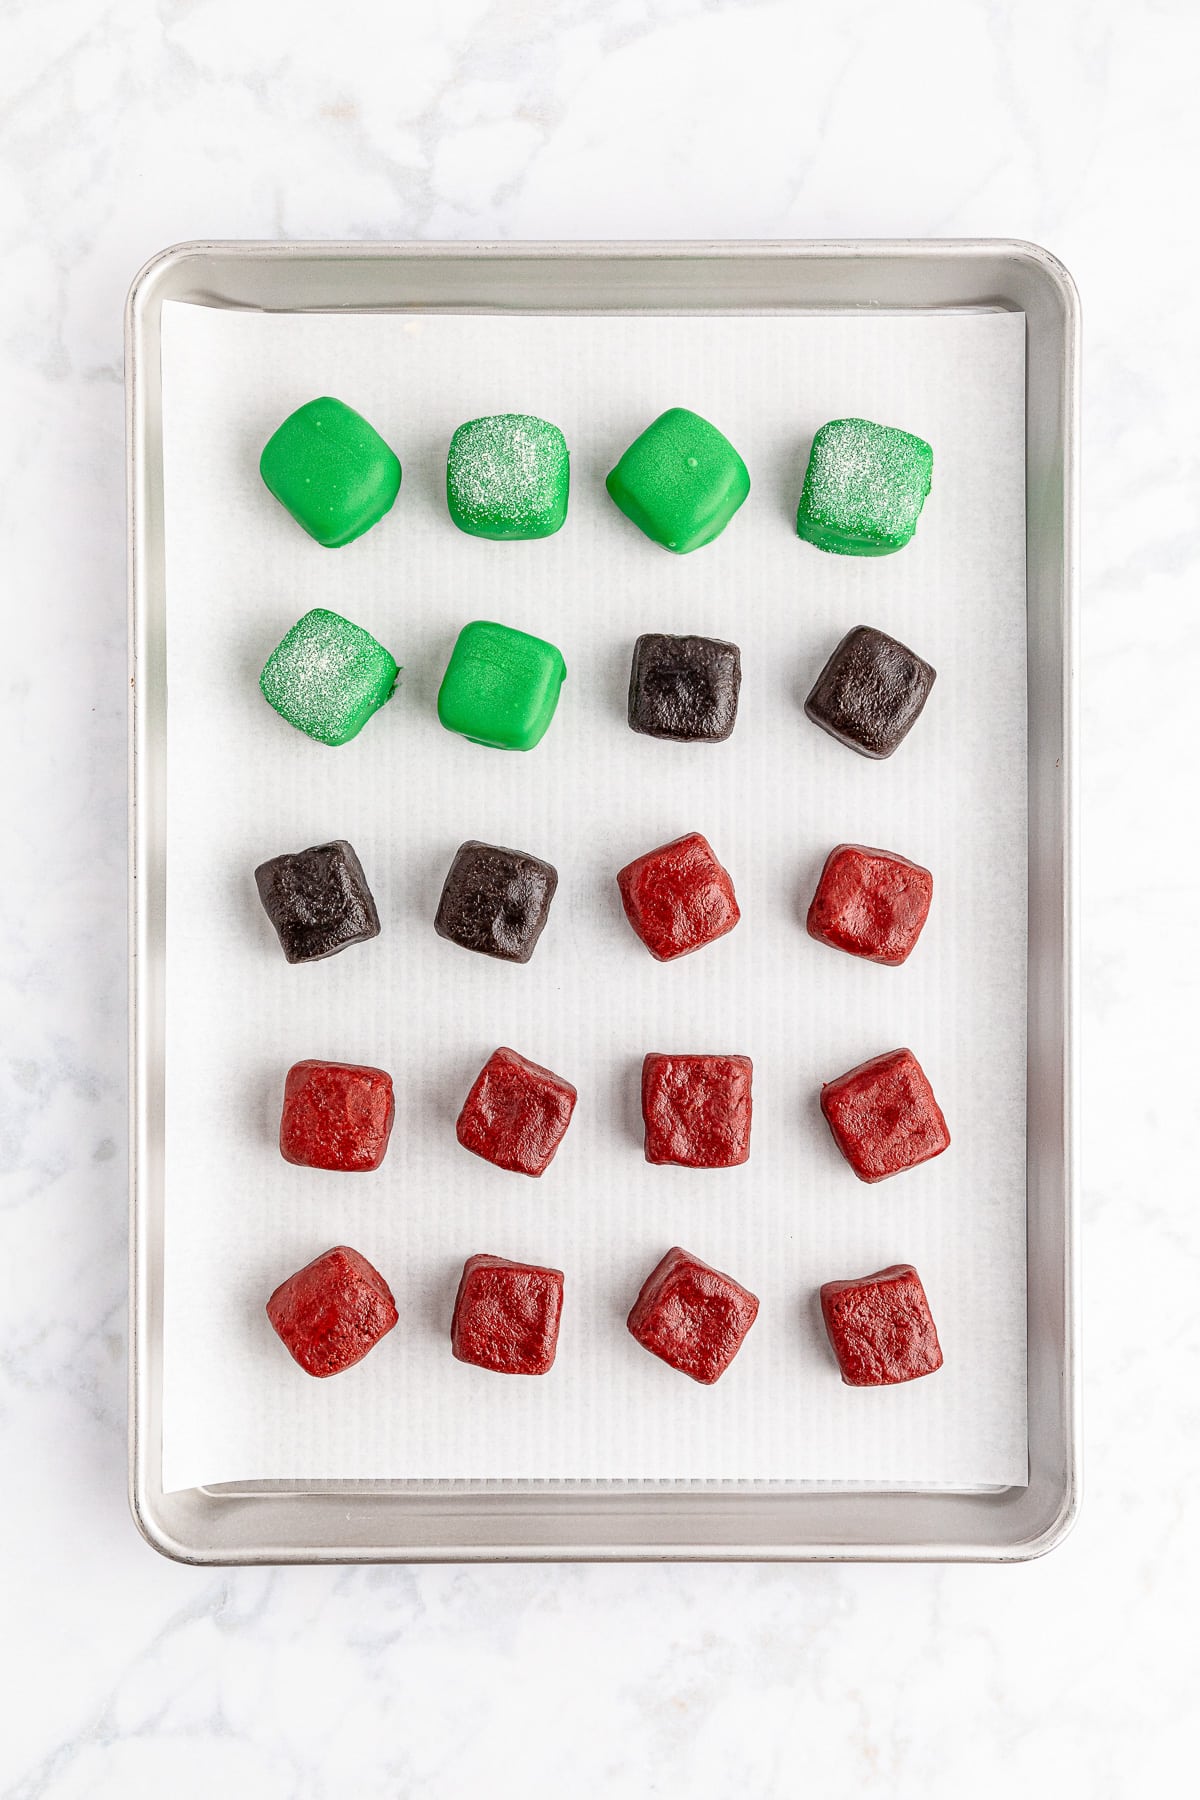 A tray of square present shaped truffles with half dipped in chocolate candy melts.